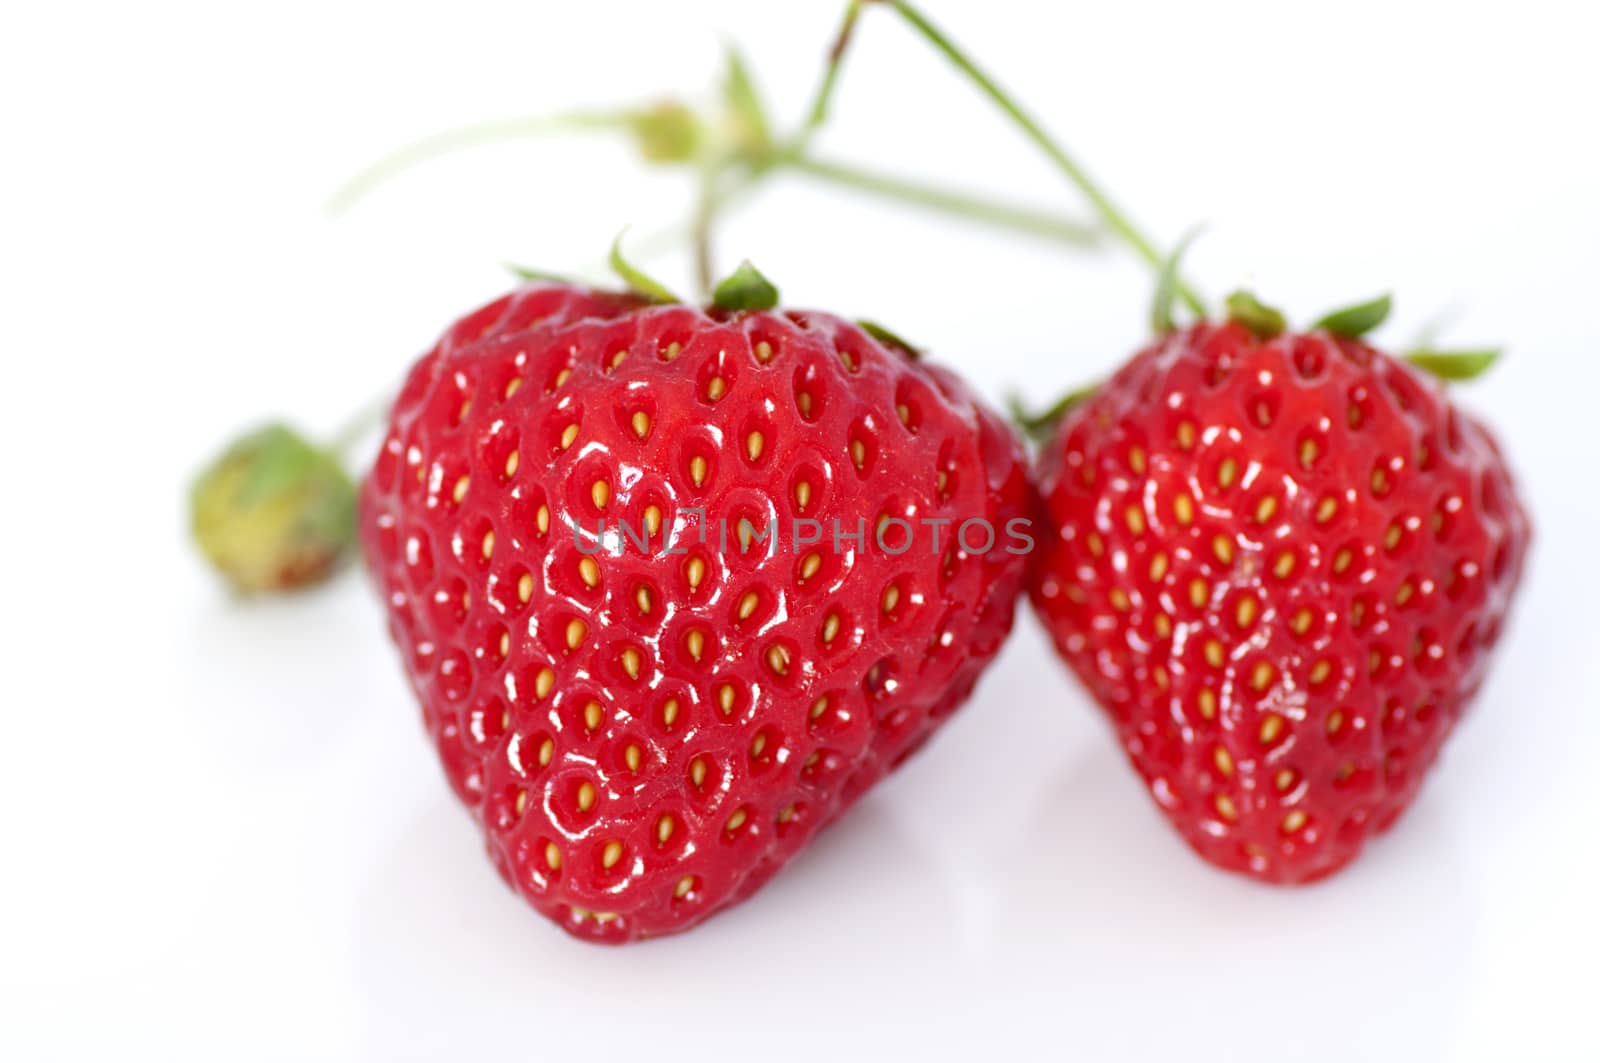 Organic strawberries on white background by dred